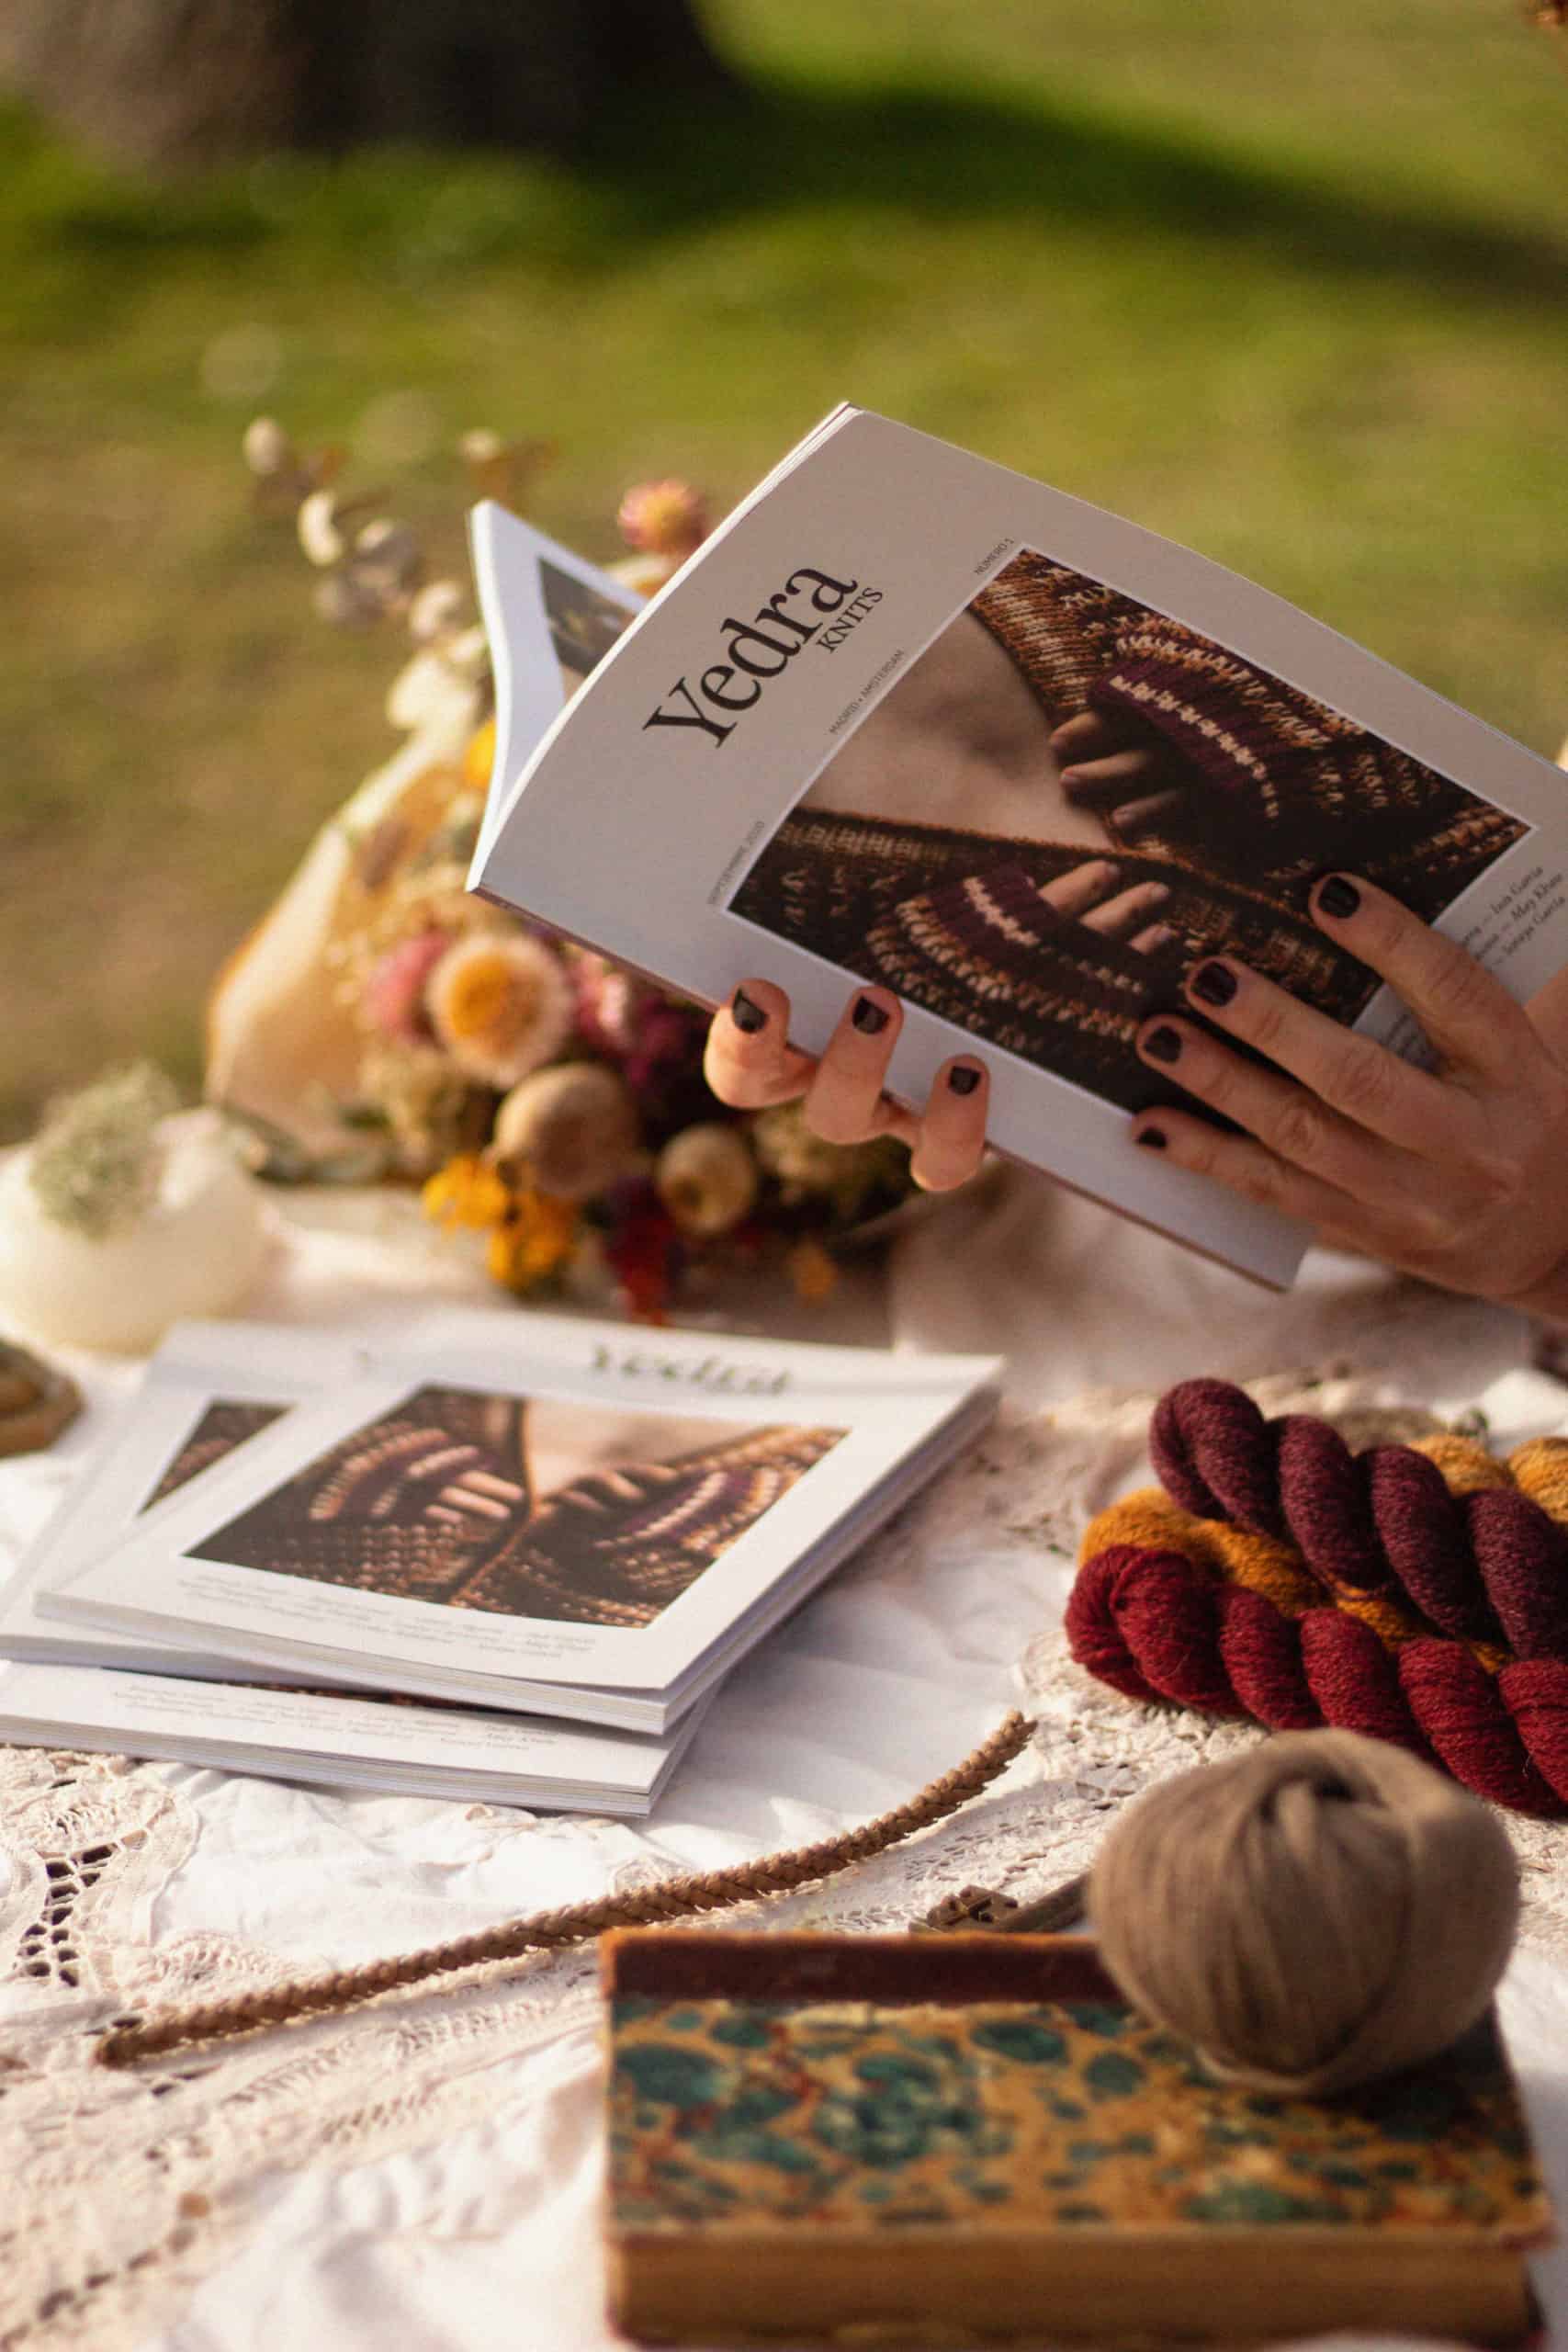 A person hlding open a copy of Yedraknits magazine.